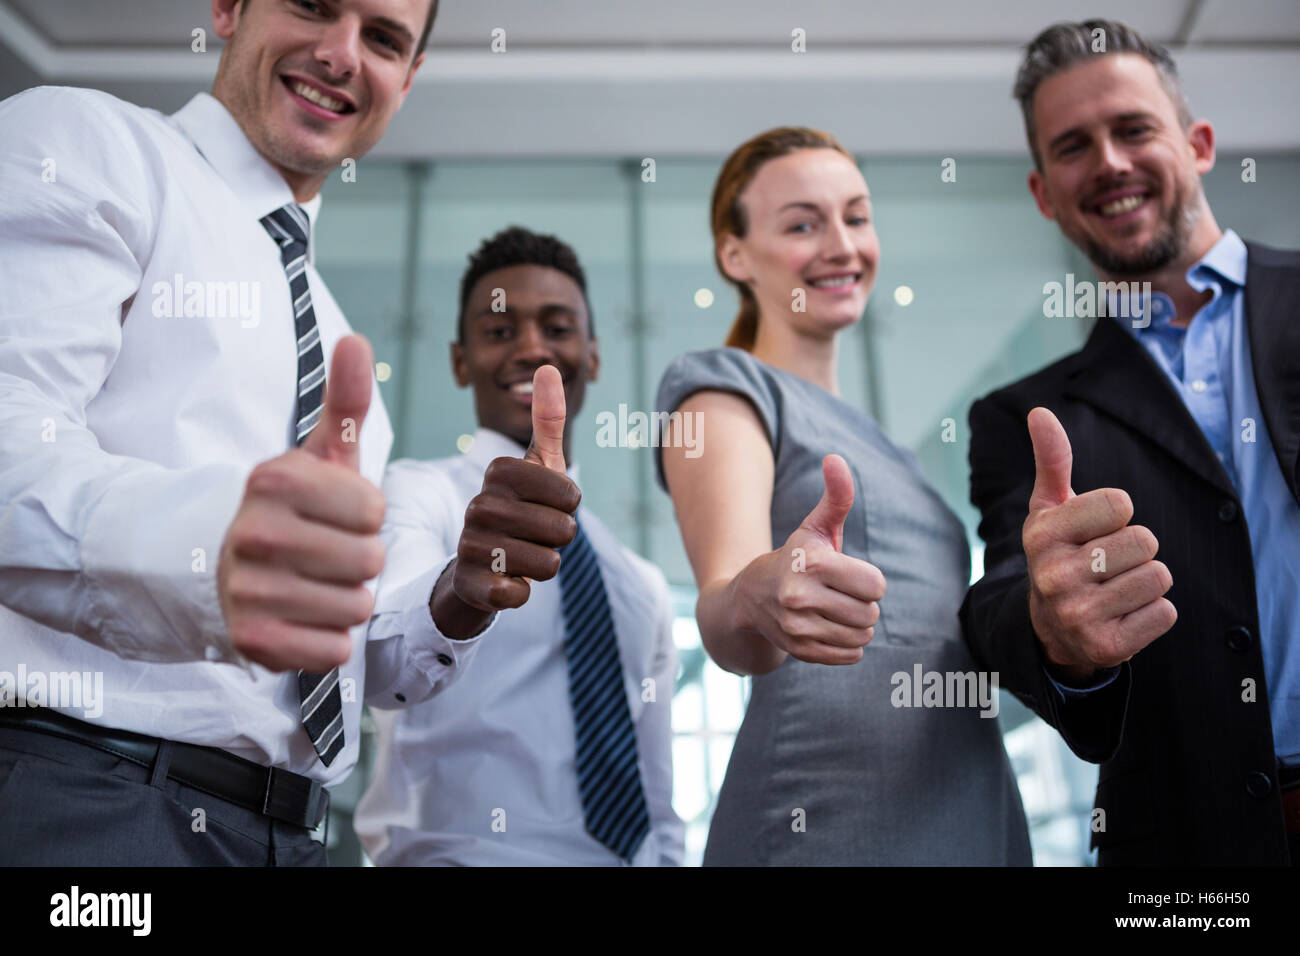 Business executive showing Thumbs up in office Banque D'Images